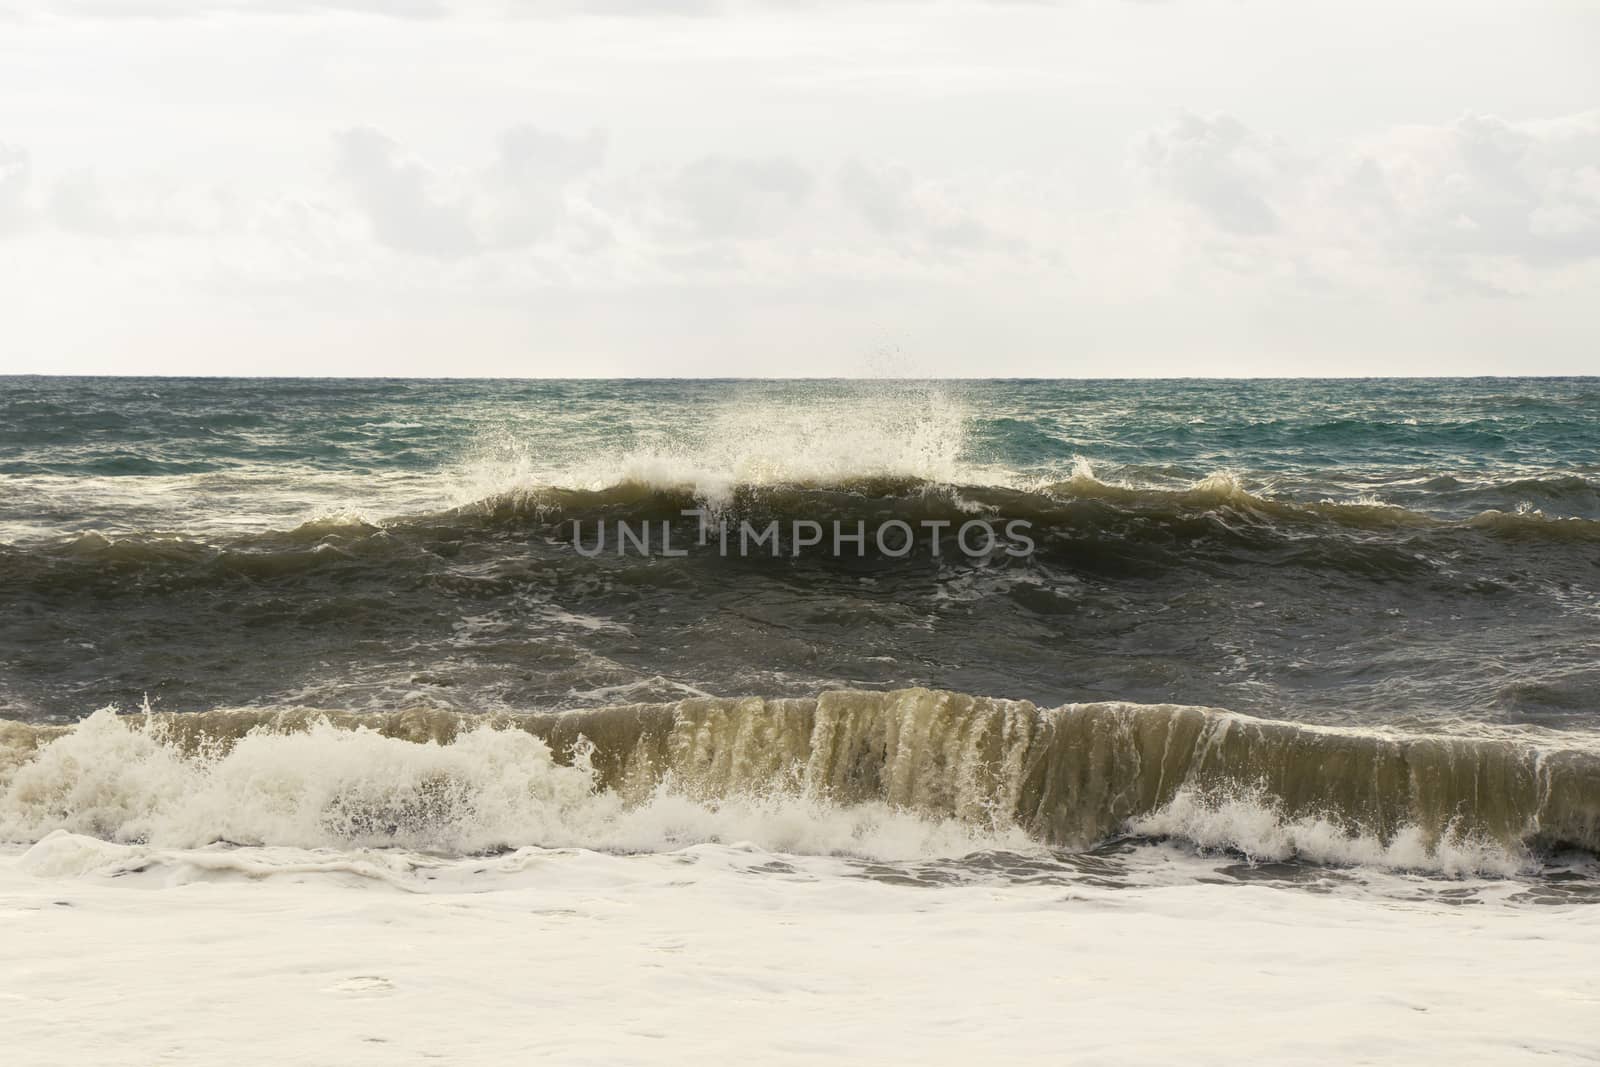 Stormy weather, waves and splashes in Batumi, Georgia. Stormy Black sea. by Taidundua